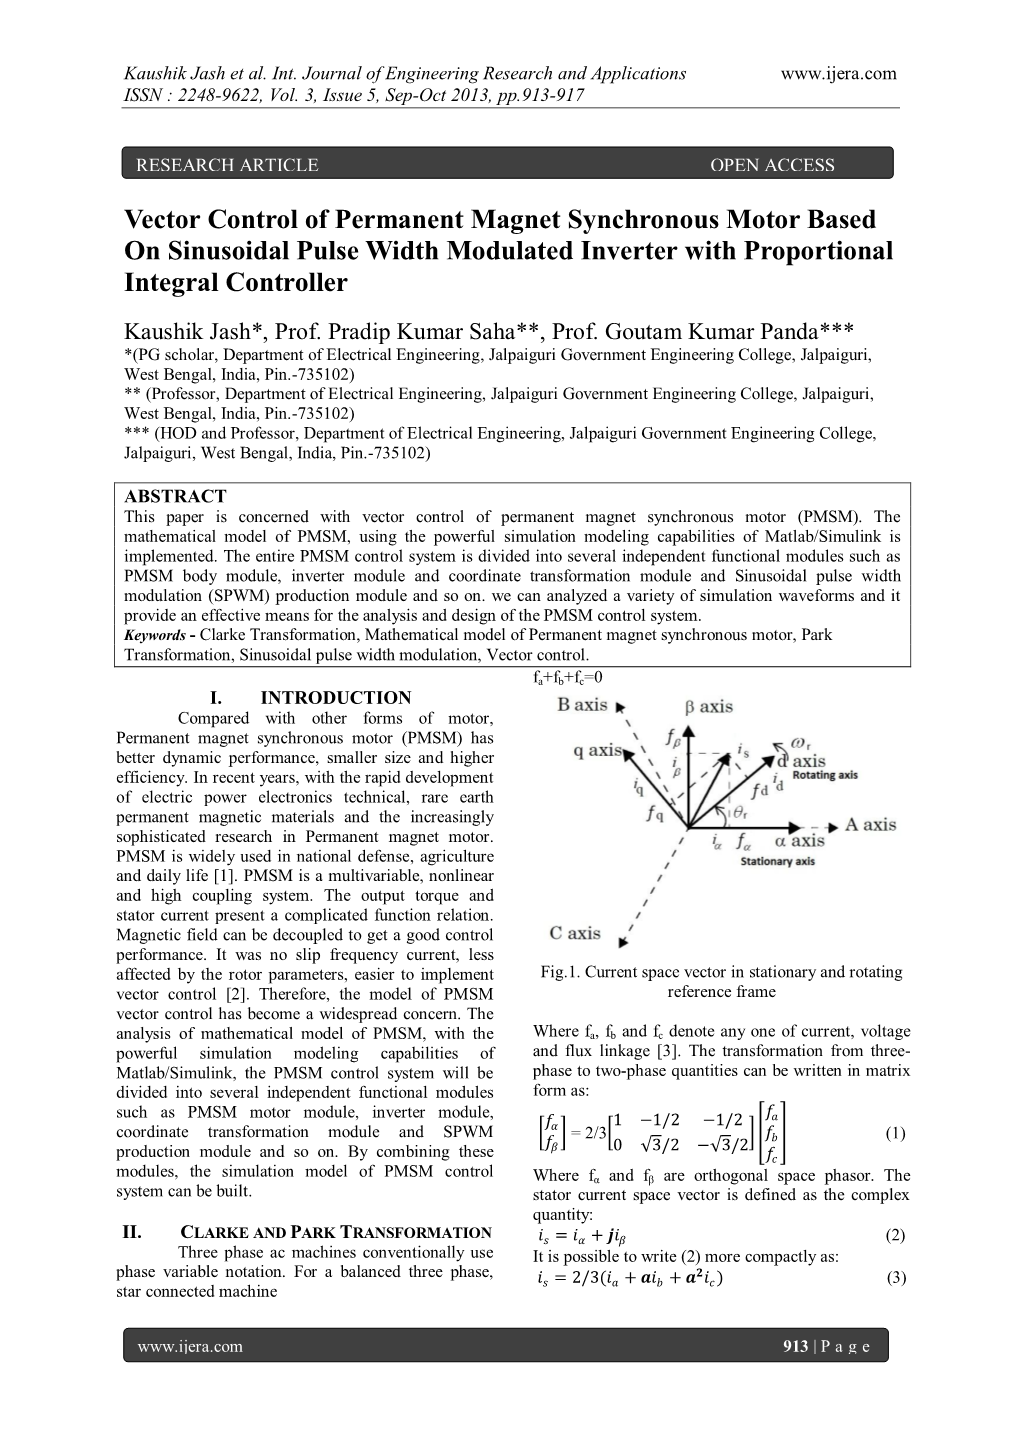 Vector Control of Permanent Magnet Synchronous Motor Based on Sinusoidal Pulse Width Modulated Inverter with Proportional Integral Controller